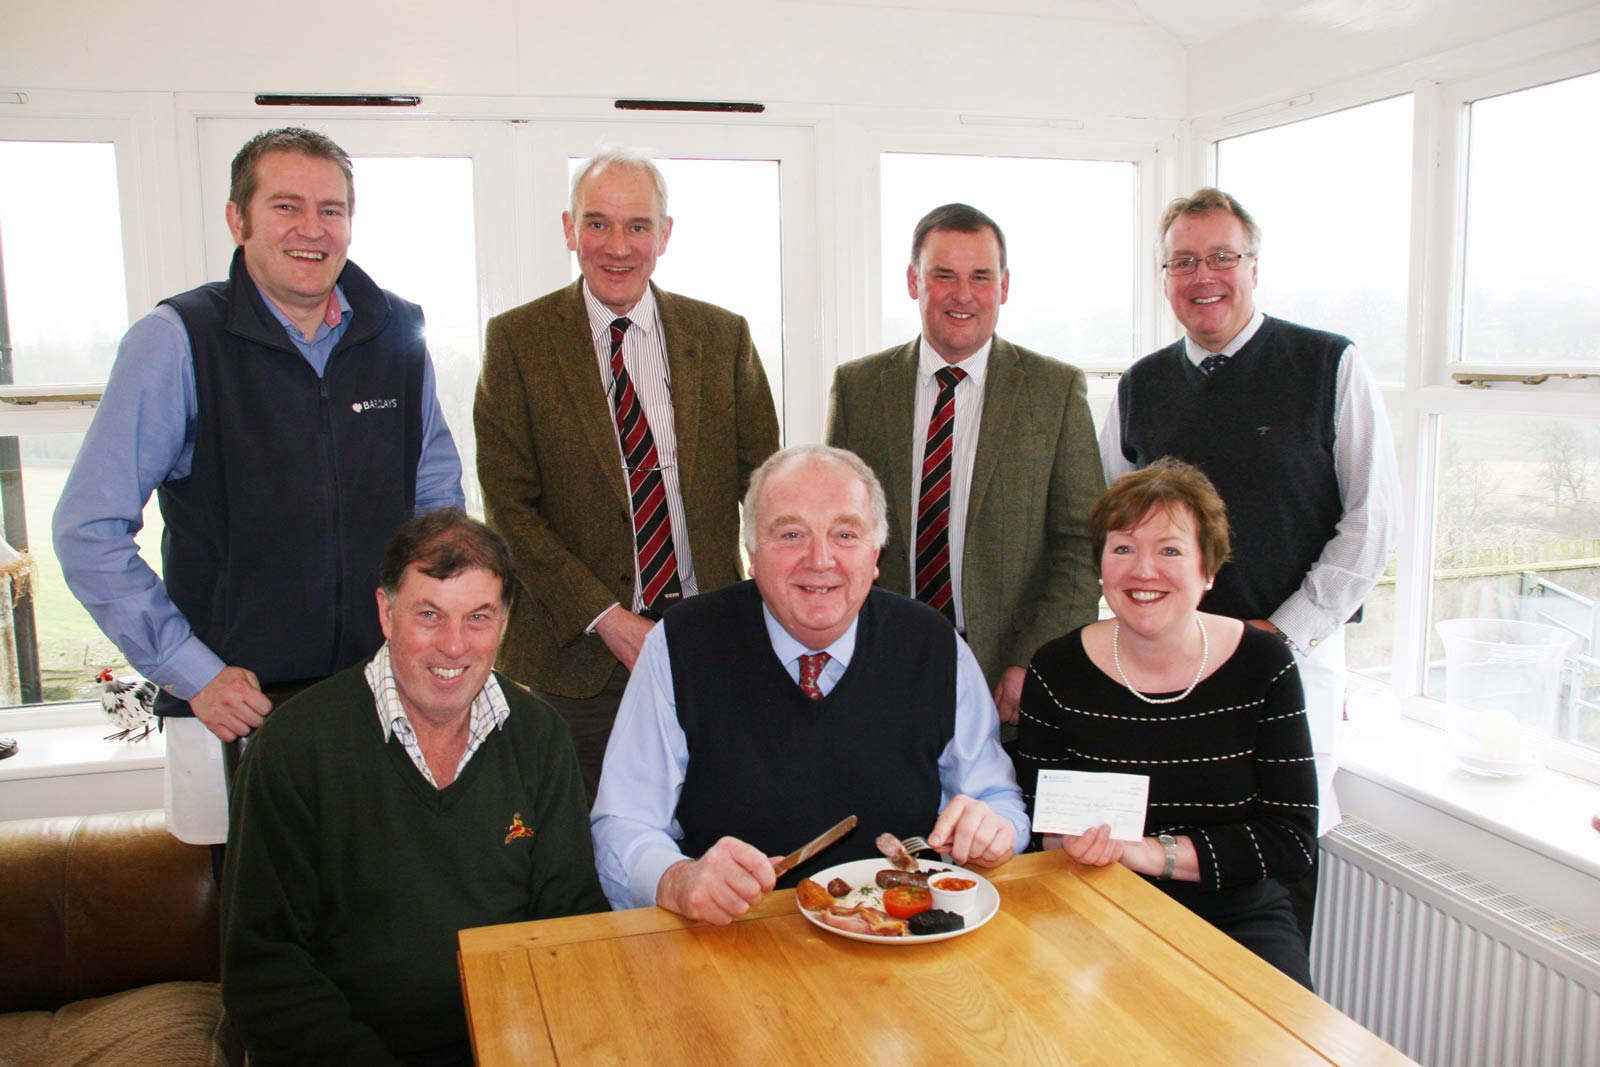 Ian Bell, chief executive of the Addington Fund, prepares to tuck into his charity breakfast, joined by hosts Chris and Christine Ryder. Standing, from left, are Barclays’ regional agricultural manager Ian Robson, Craven Cattle Marts’ general manager Jeremy Eaton, CCM director Kevin Wilson and Barclays’ regional agricultural director John Pinches